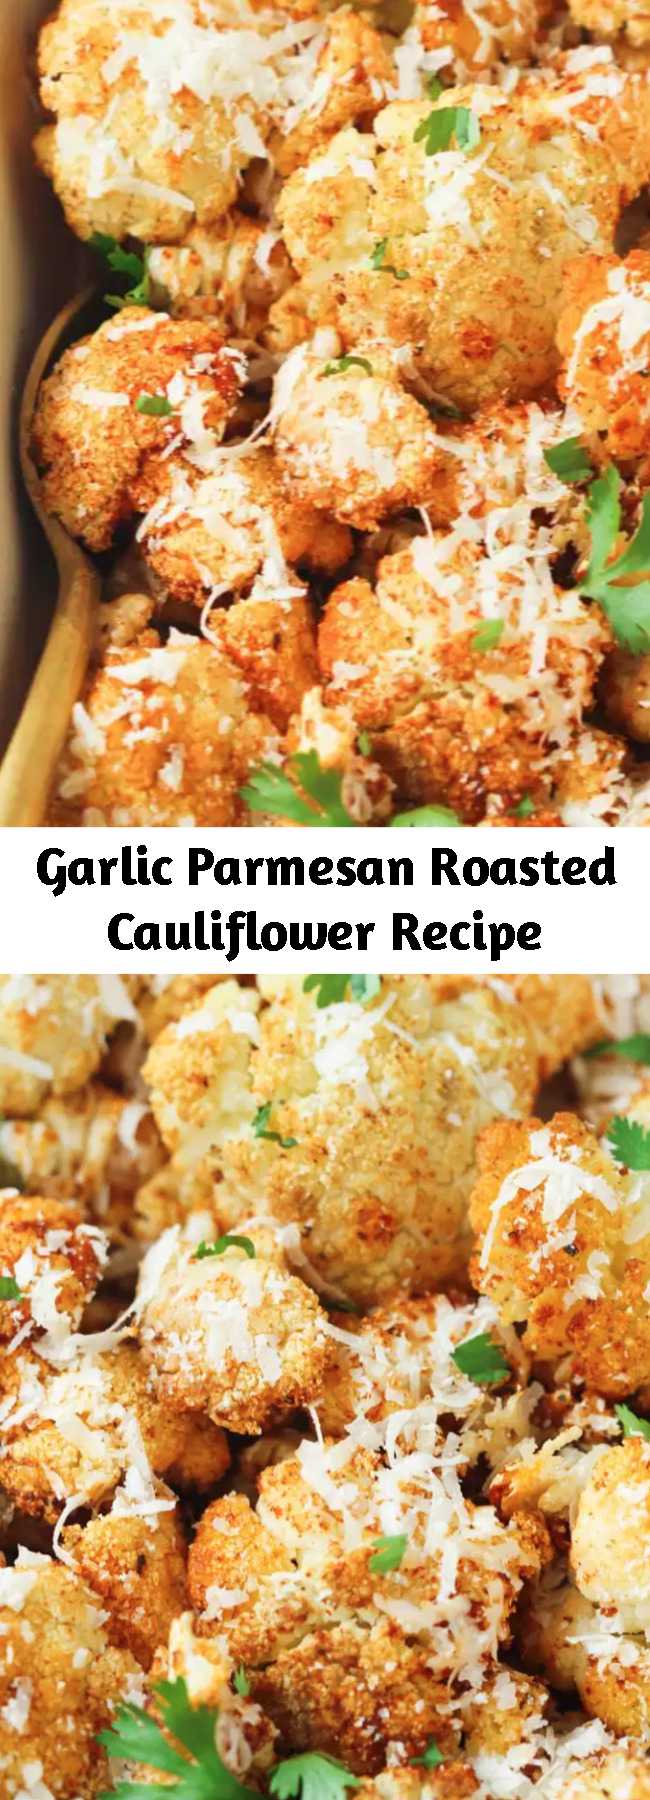 Garlic Parmesan Roasted Cauliflower Recipe - This easy Garlic Parmesan Roasted Cauliflower is a perfect low-carb side dish for any occasion. It’s well-seasoned with garlic, black pepper, paprika, and Parmesan. I’m sure this will become one of your favourite cauliflower recipes to make. 